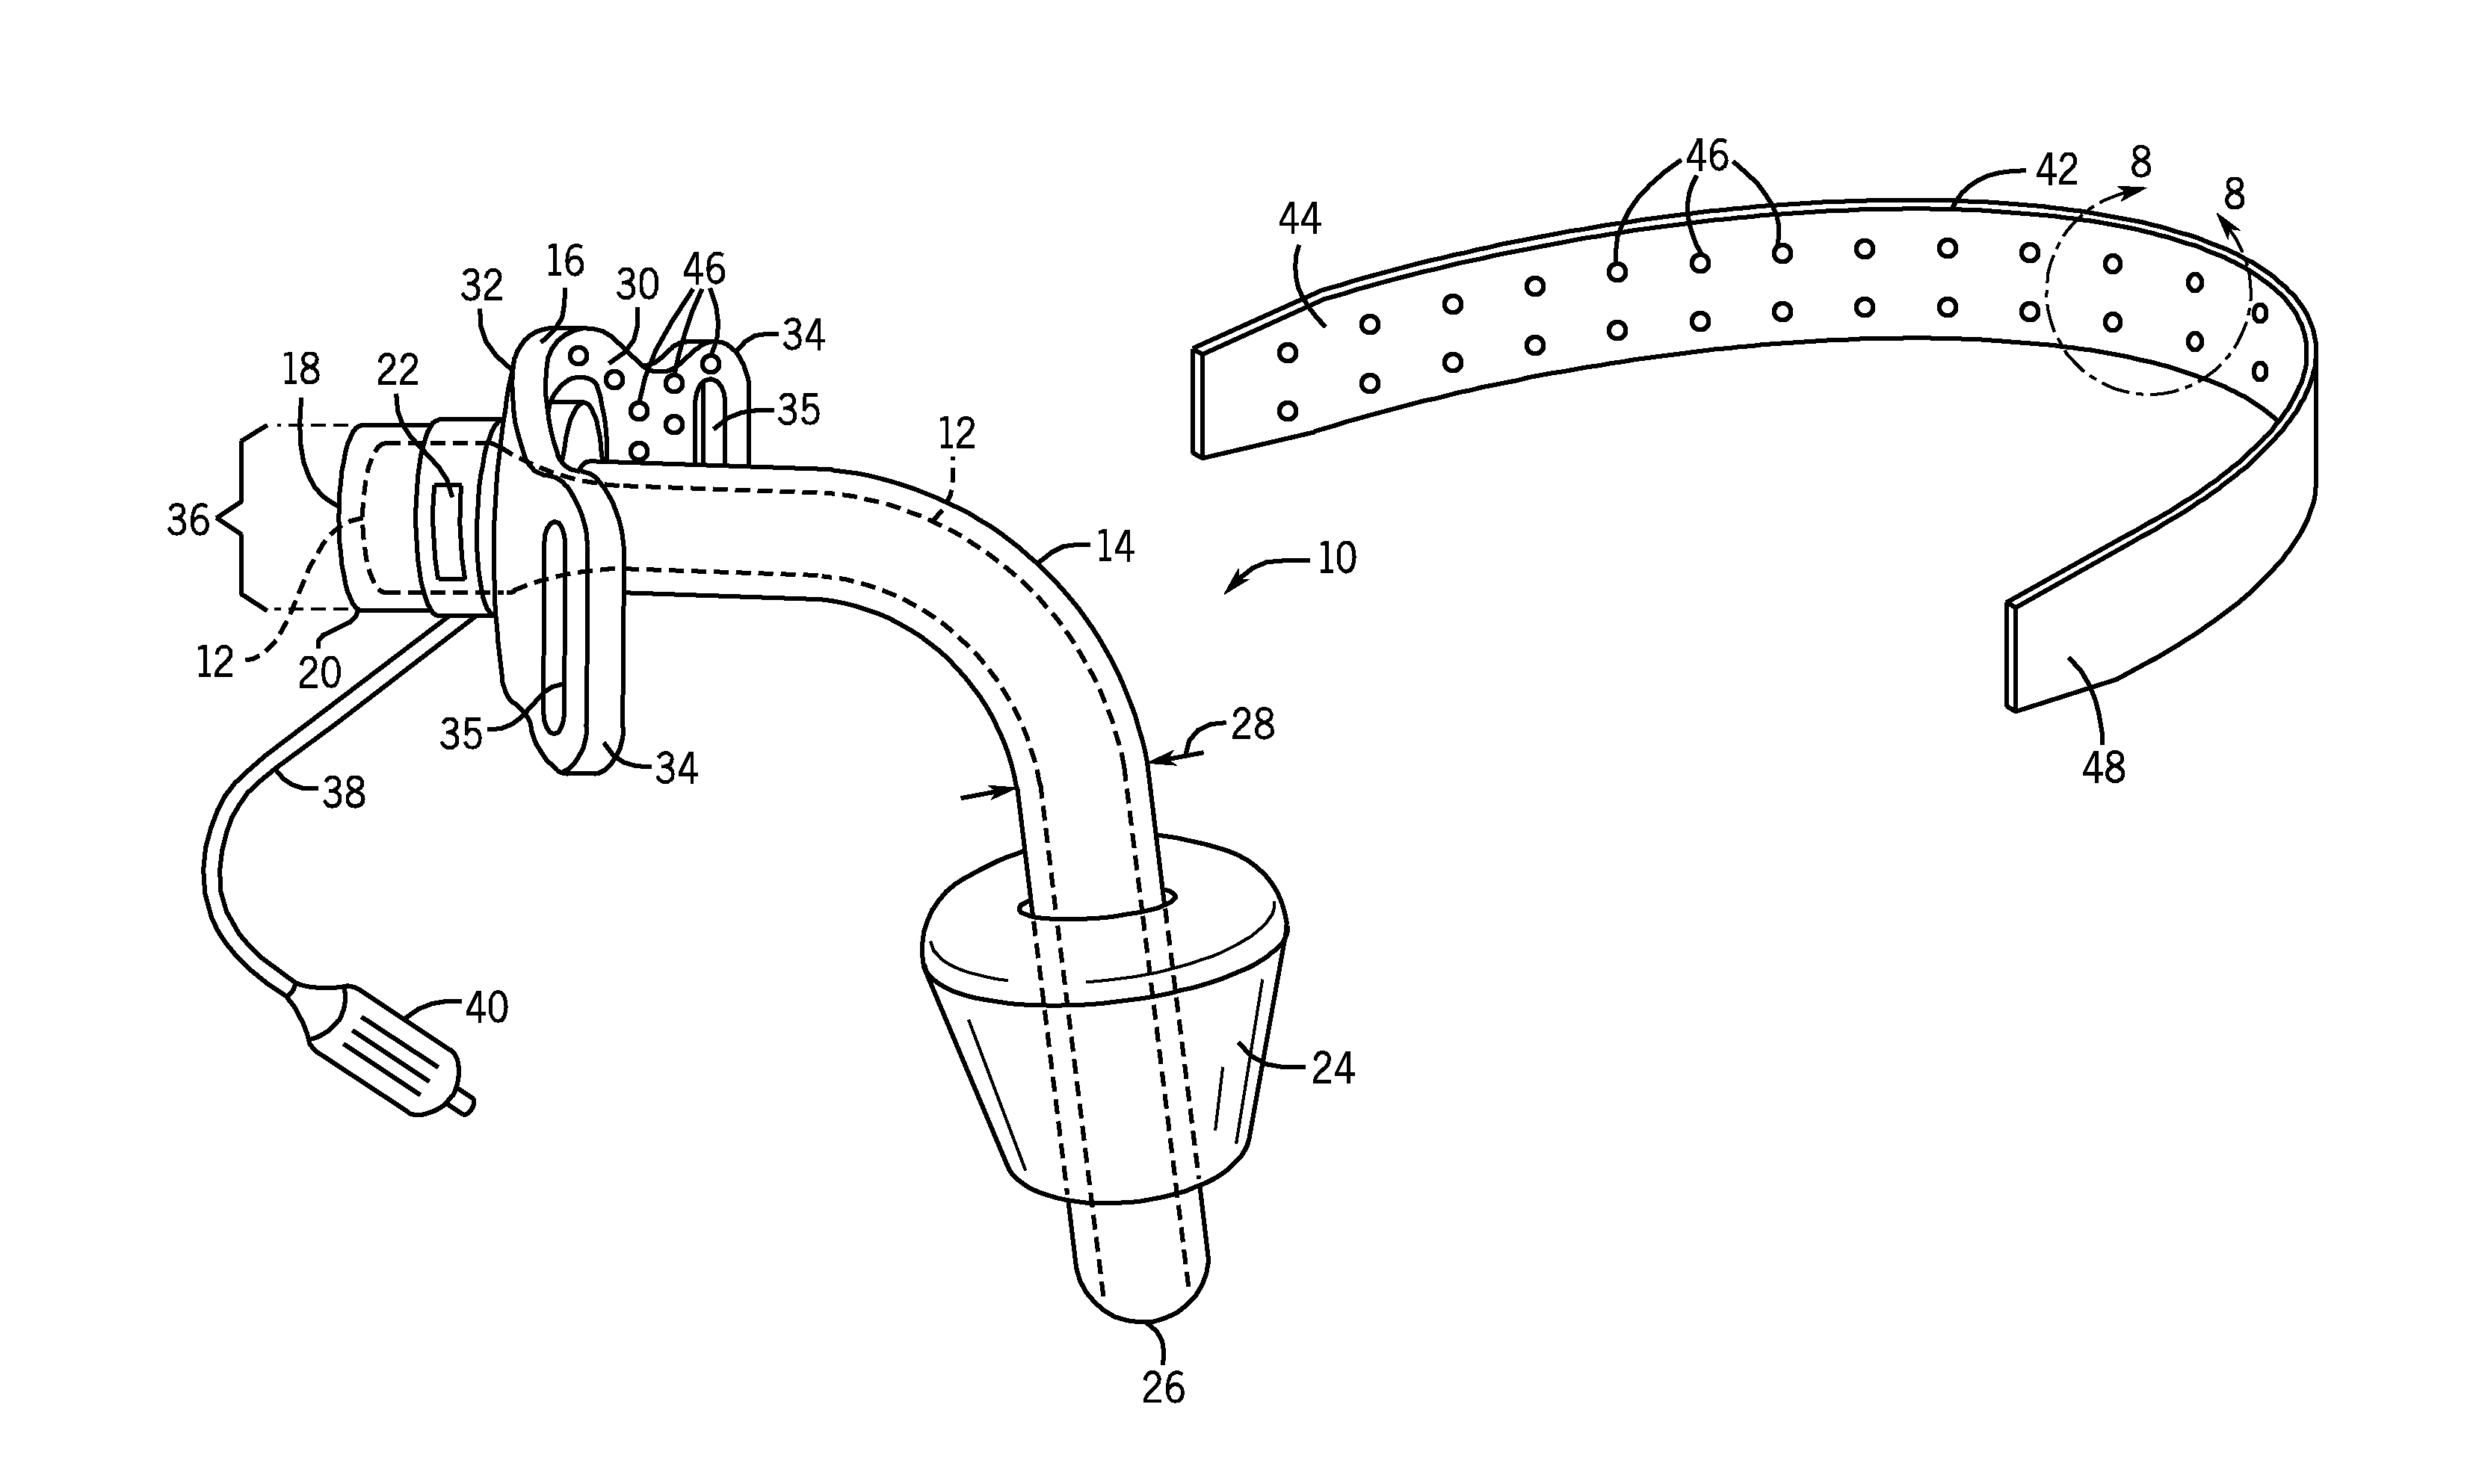 Tracheal tube system for enhanced patient comfort